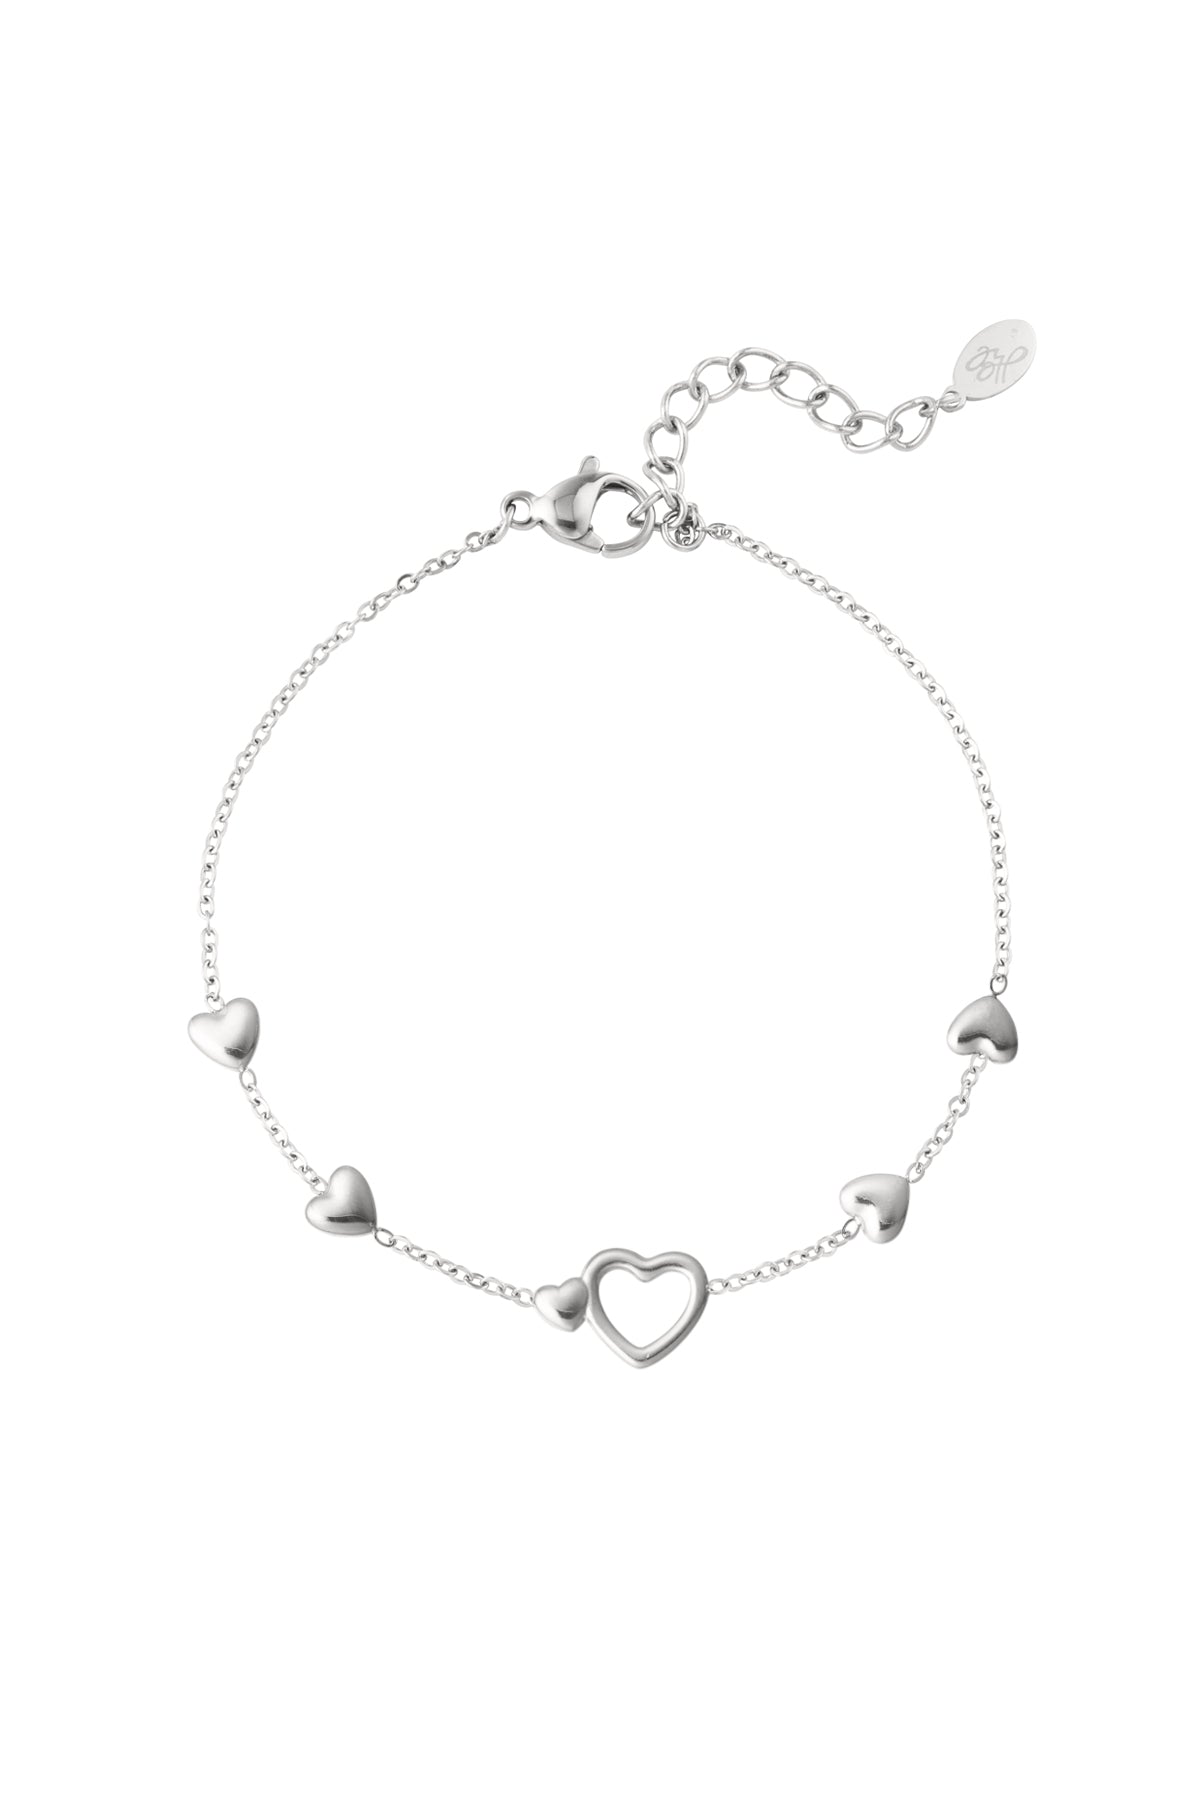 ALL YOU NEED IS LOVE ARMBAND